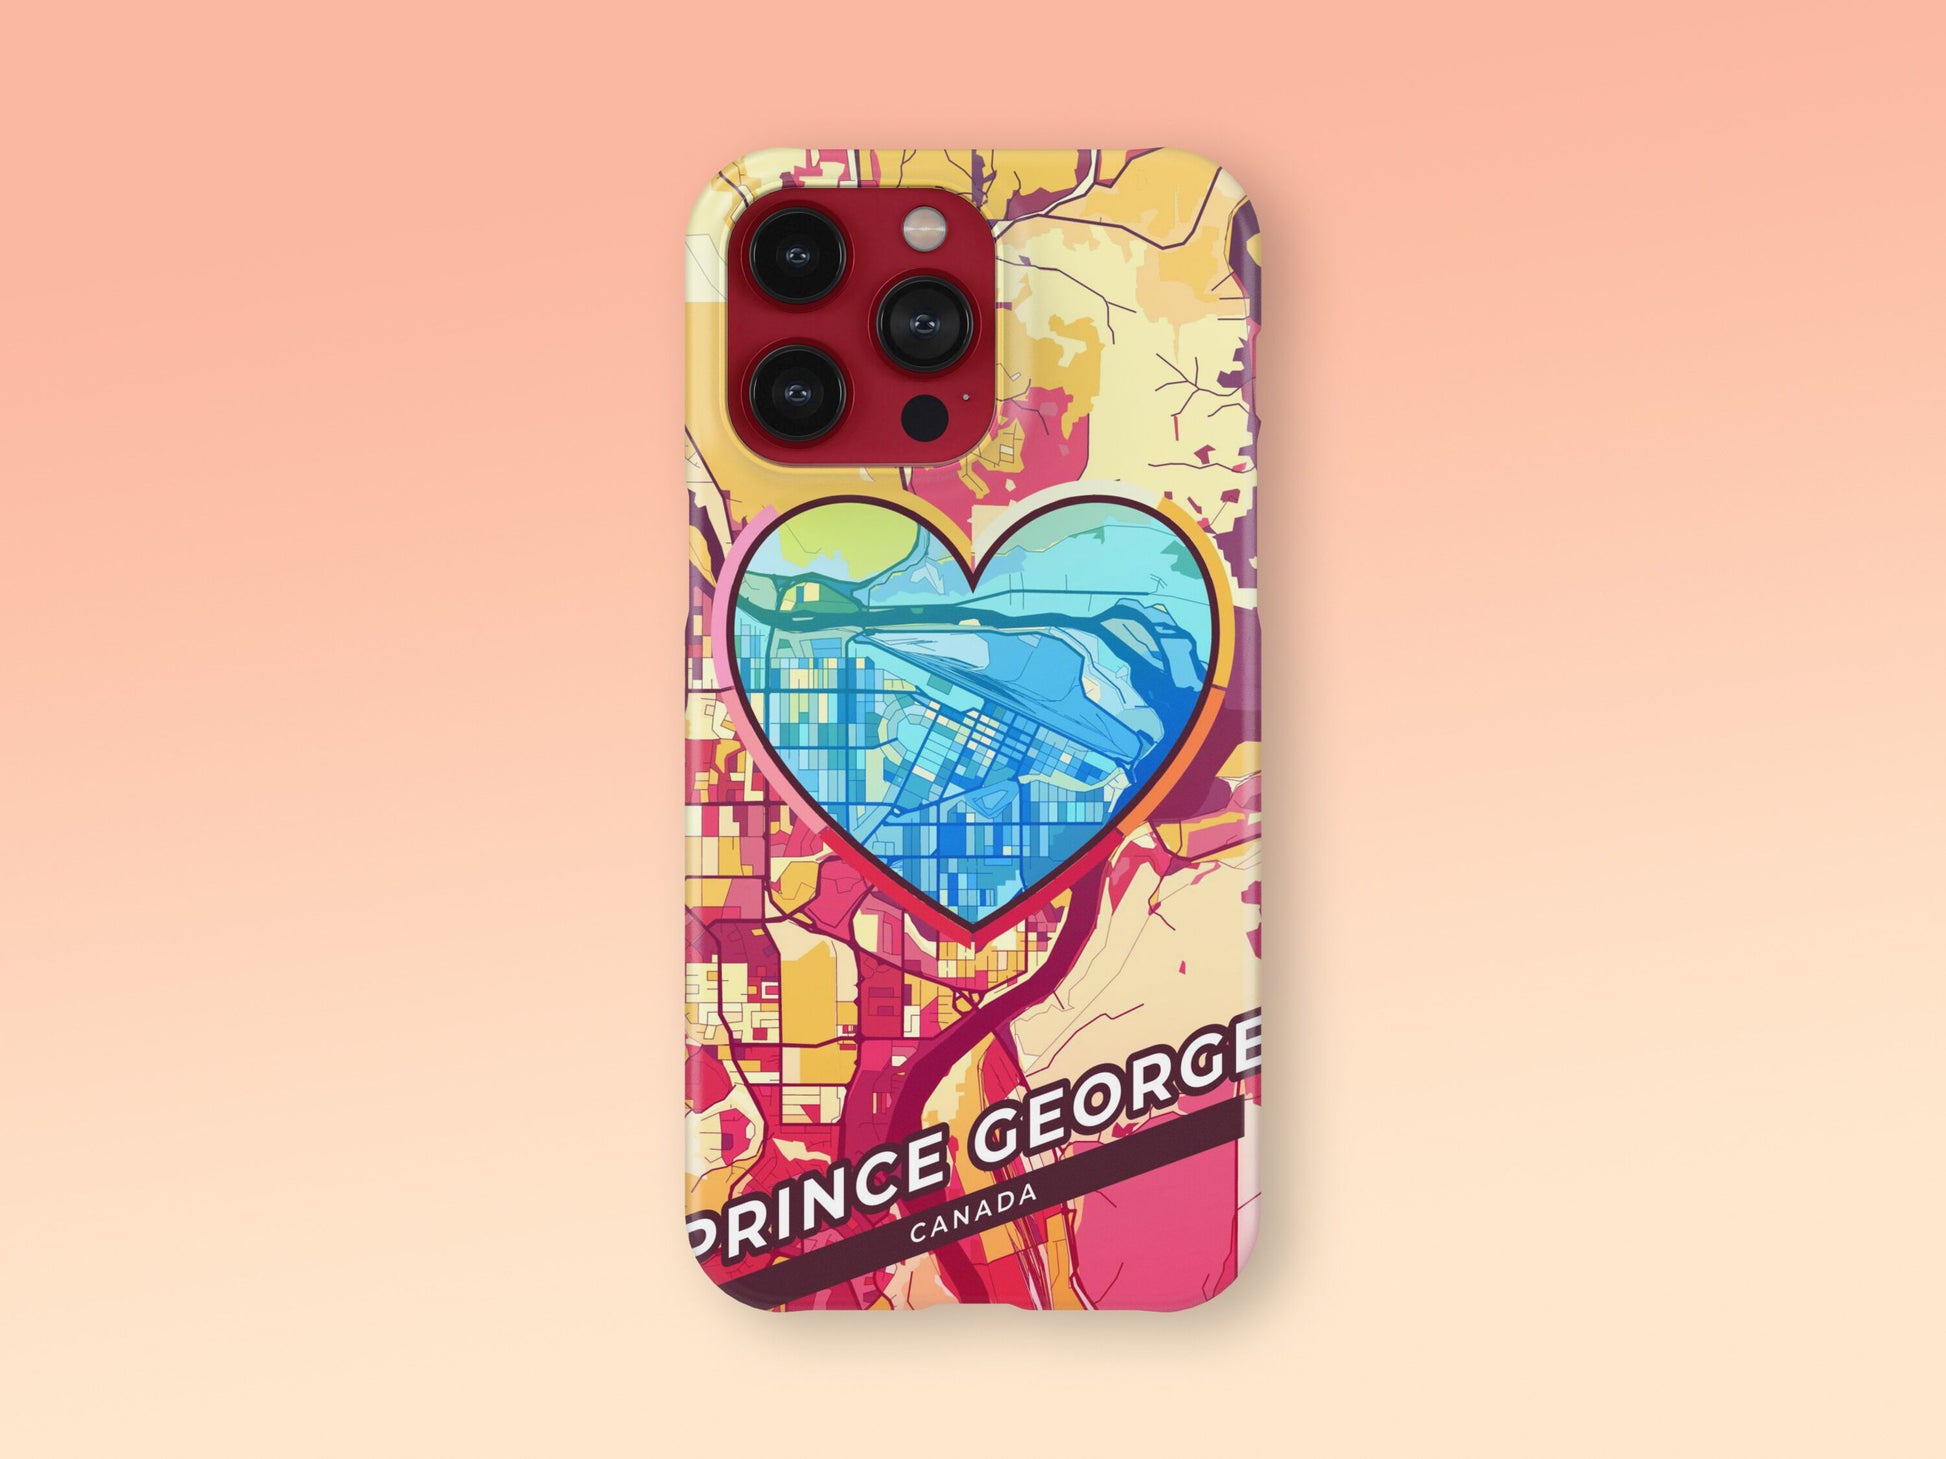 Prince George Canada slim phone case with colorful icon. Birthday, wedding or housewarming gift. Couple match cases. 2